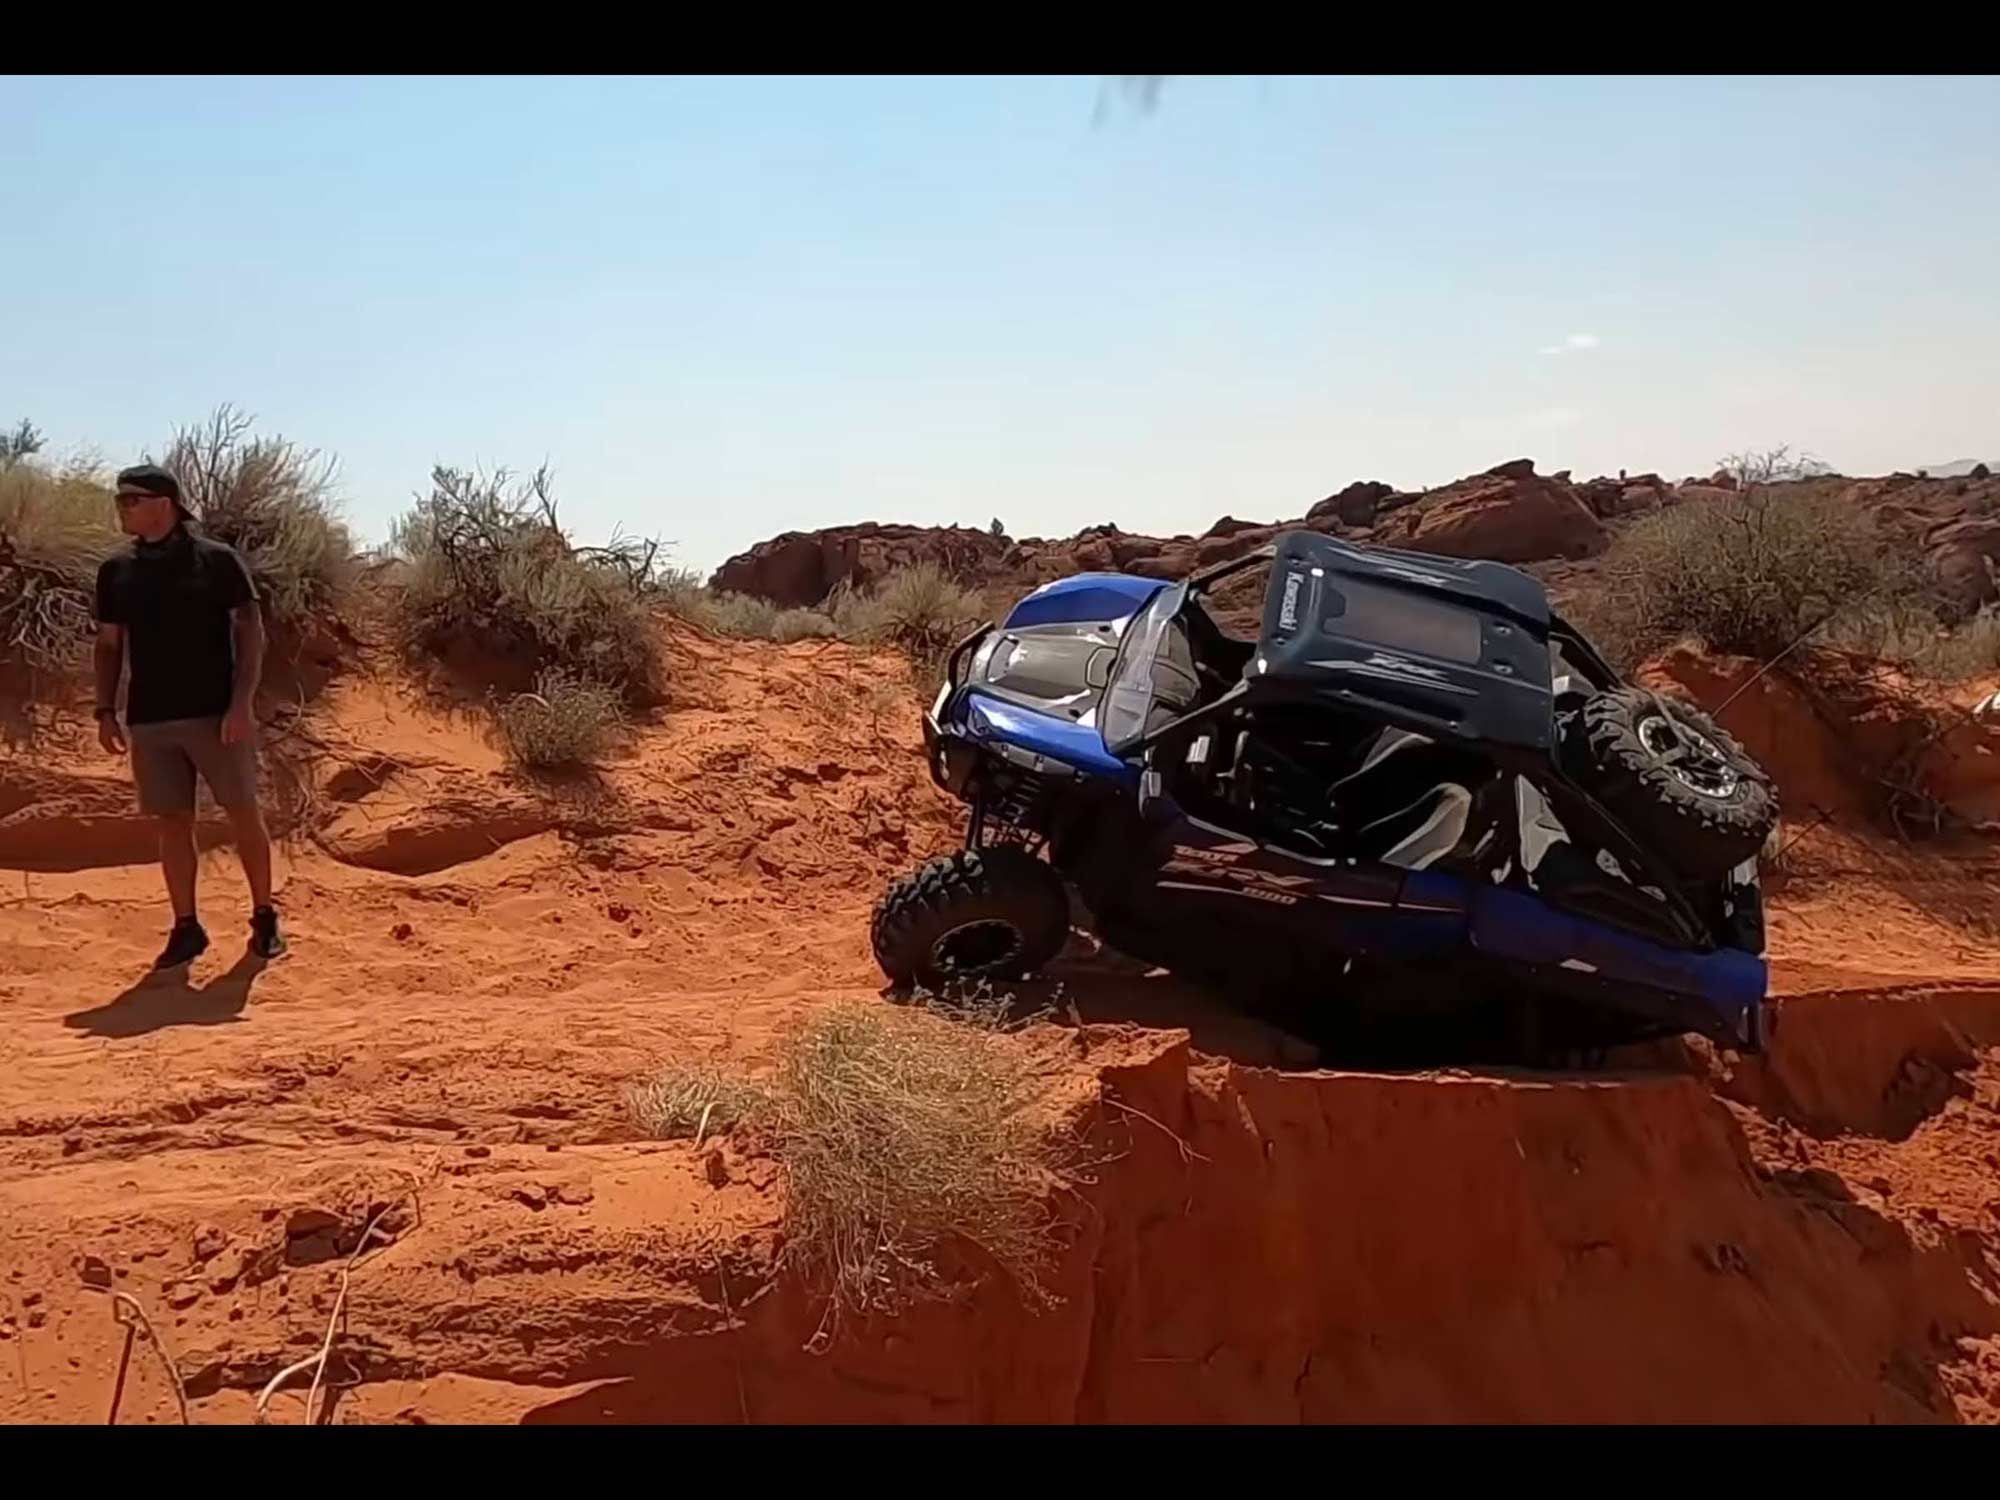 In this video, which does not appear to be the subject of any investigation, MORR got this Kawasaki Teryx KRX 1000 unstuck.